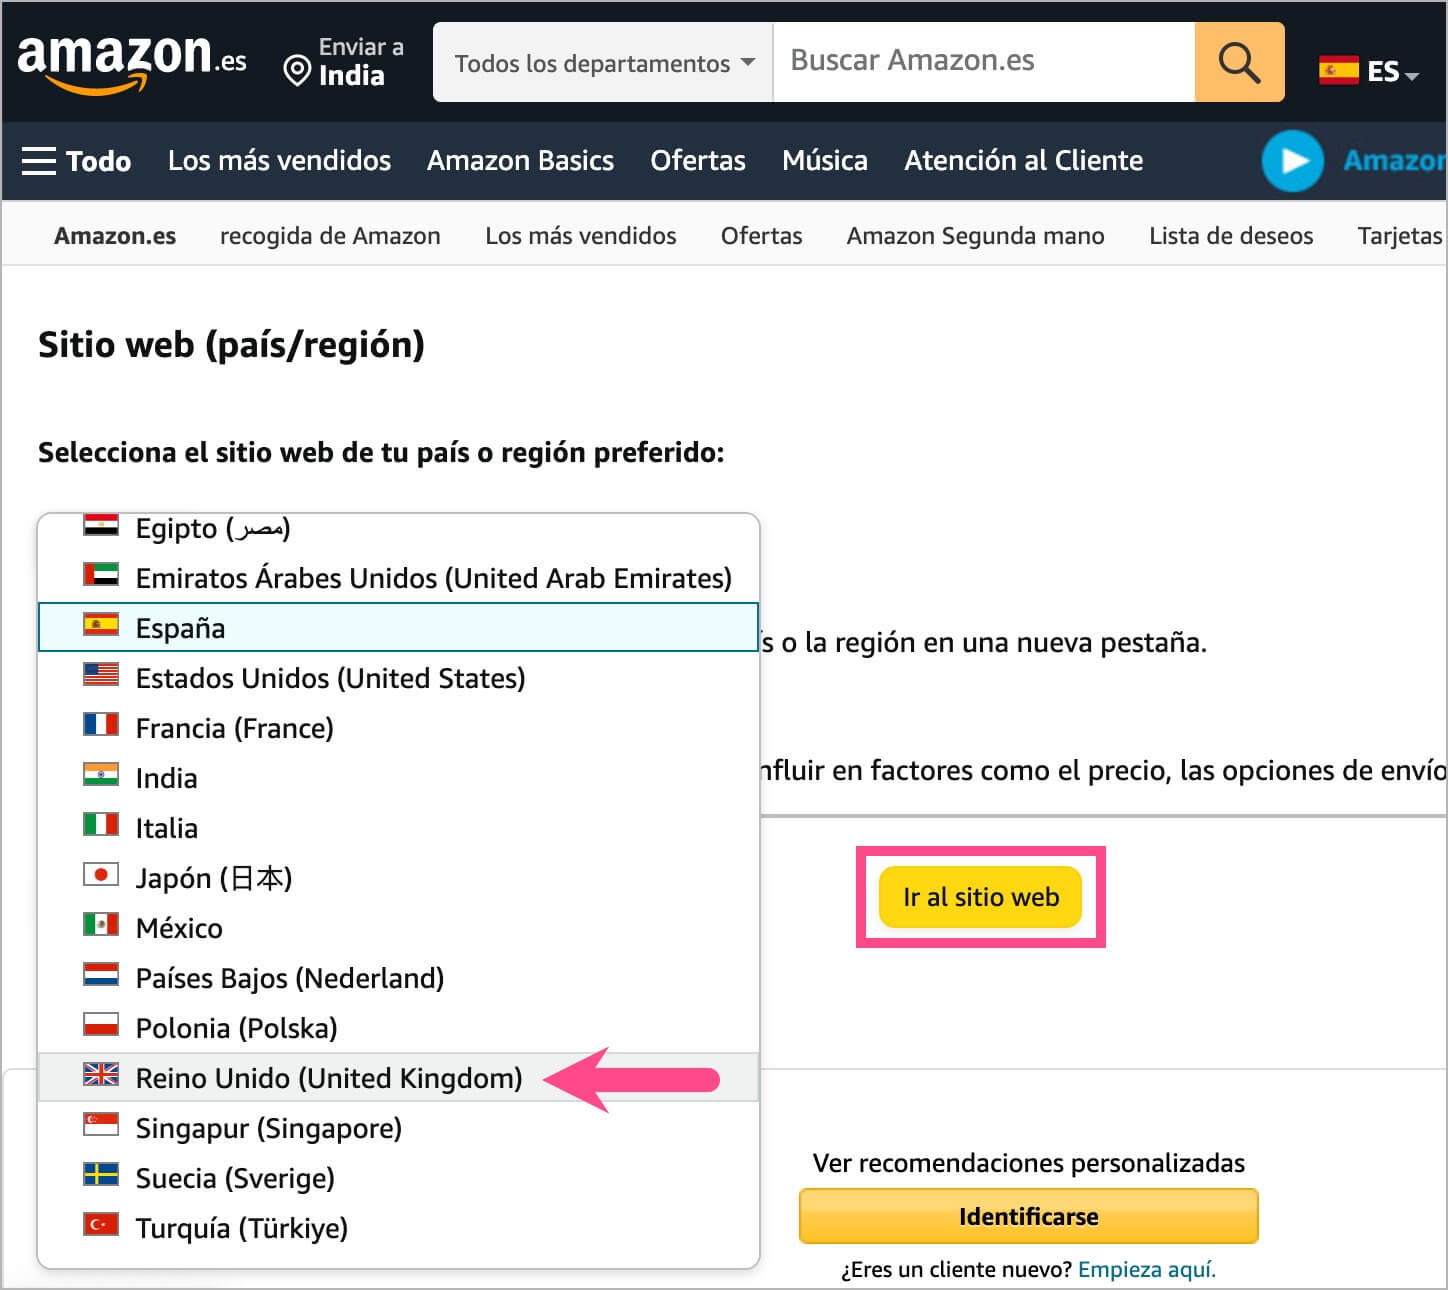 how to switch from spanish to english language on amazon website